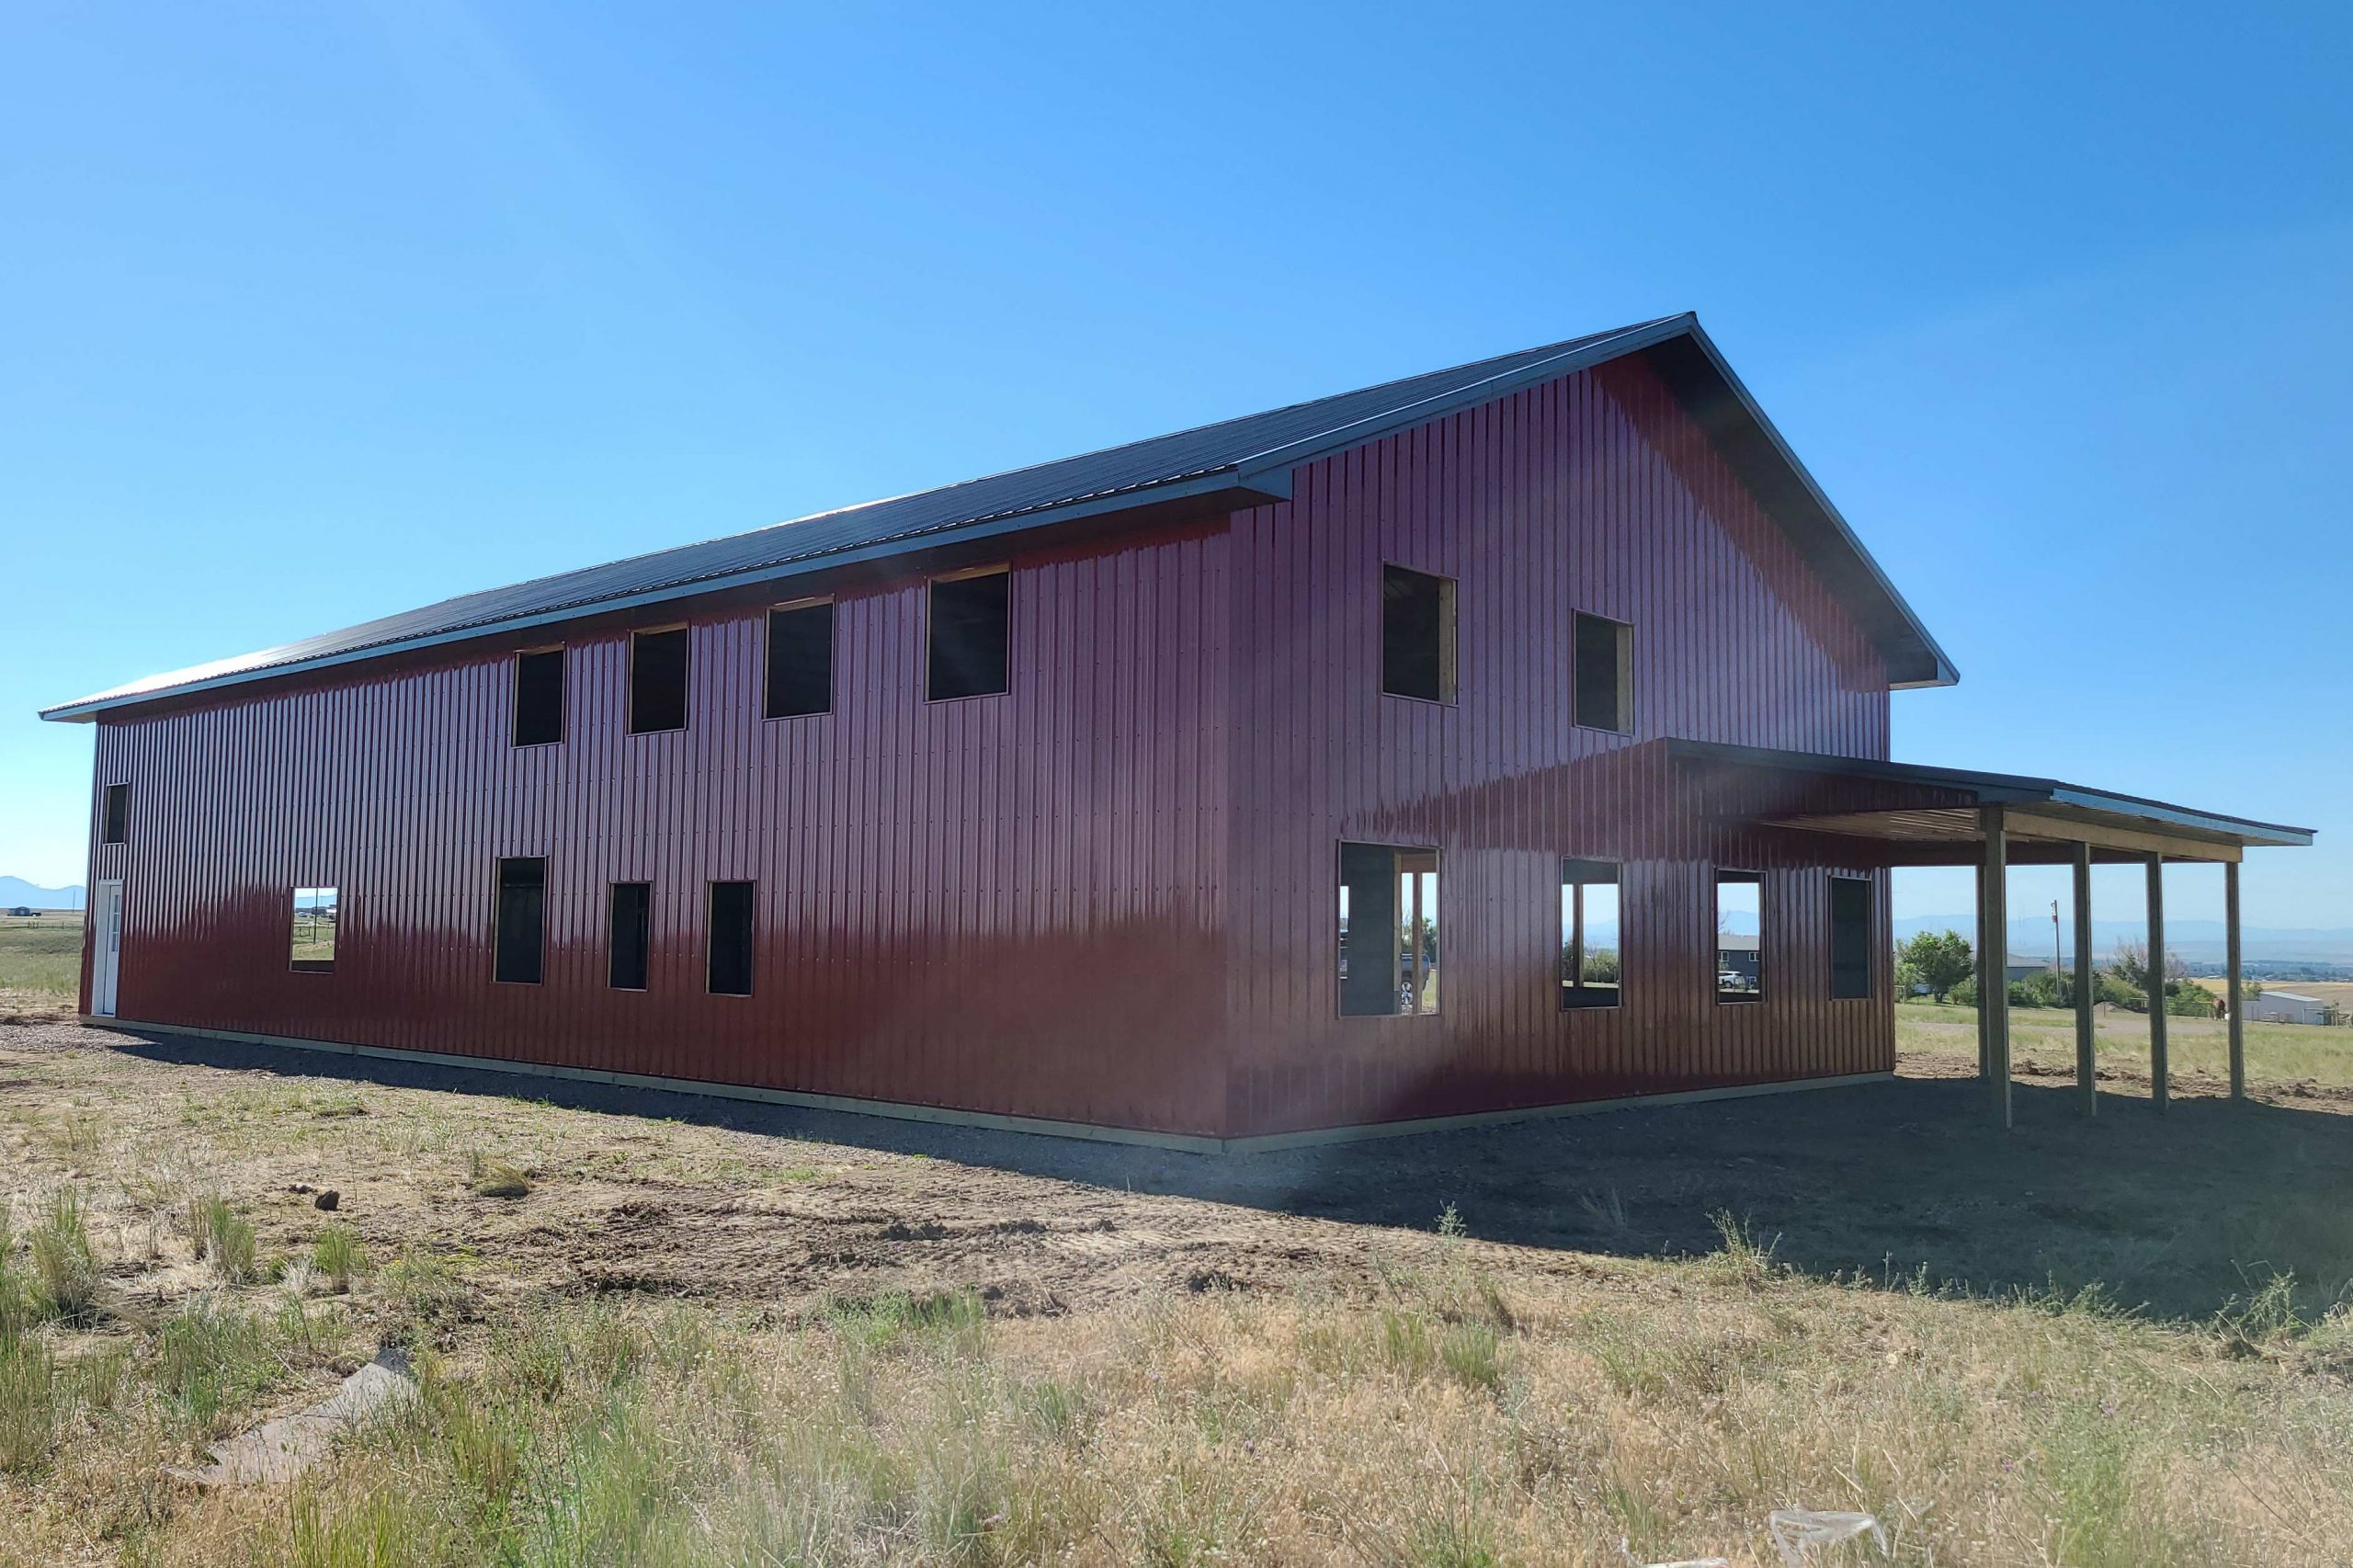 9 Reasons You Should Build a New Garage in Wyoming